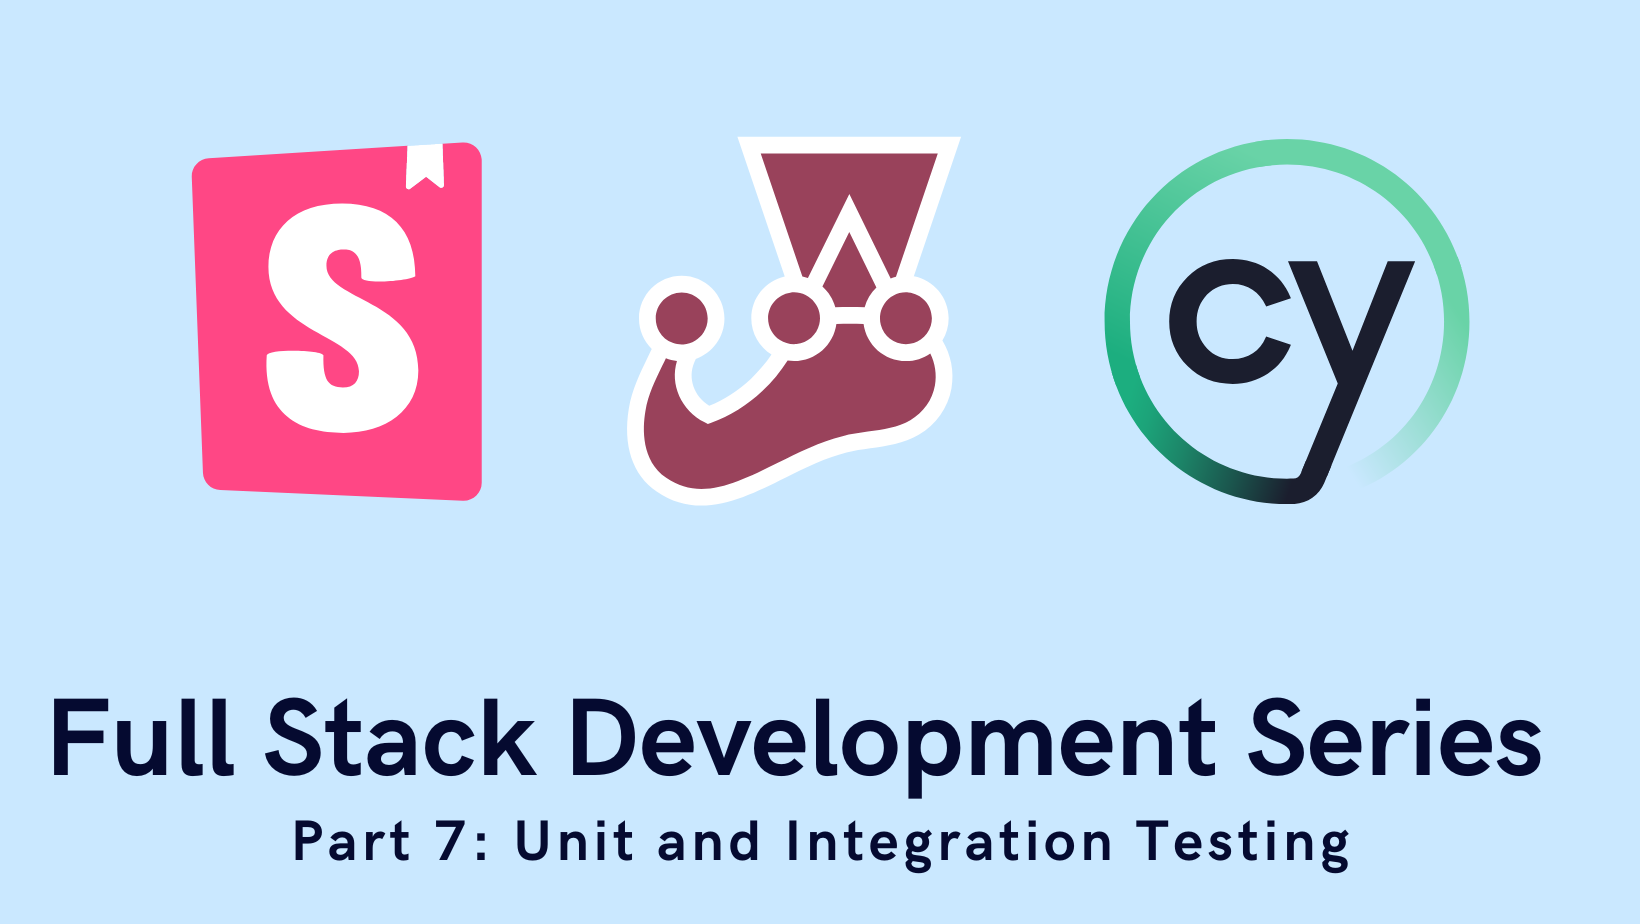 Full Stack Development Series Part 7: Unit and Integration Testing